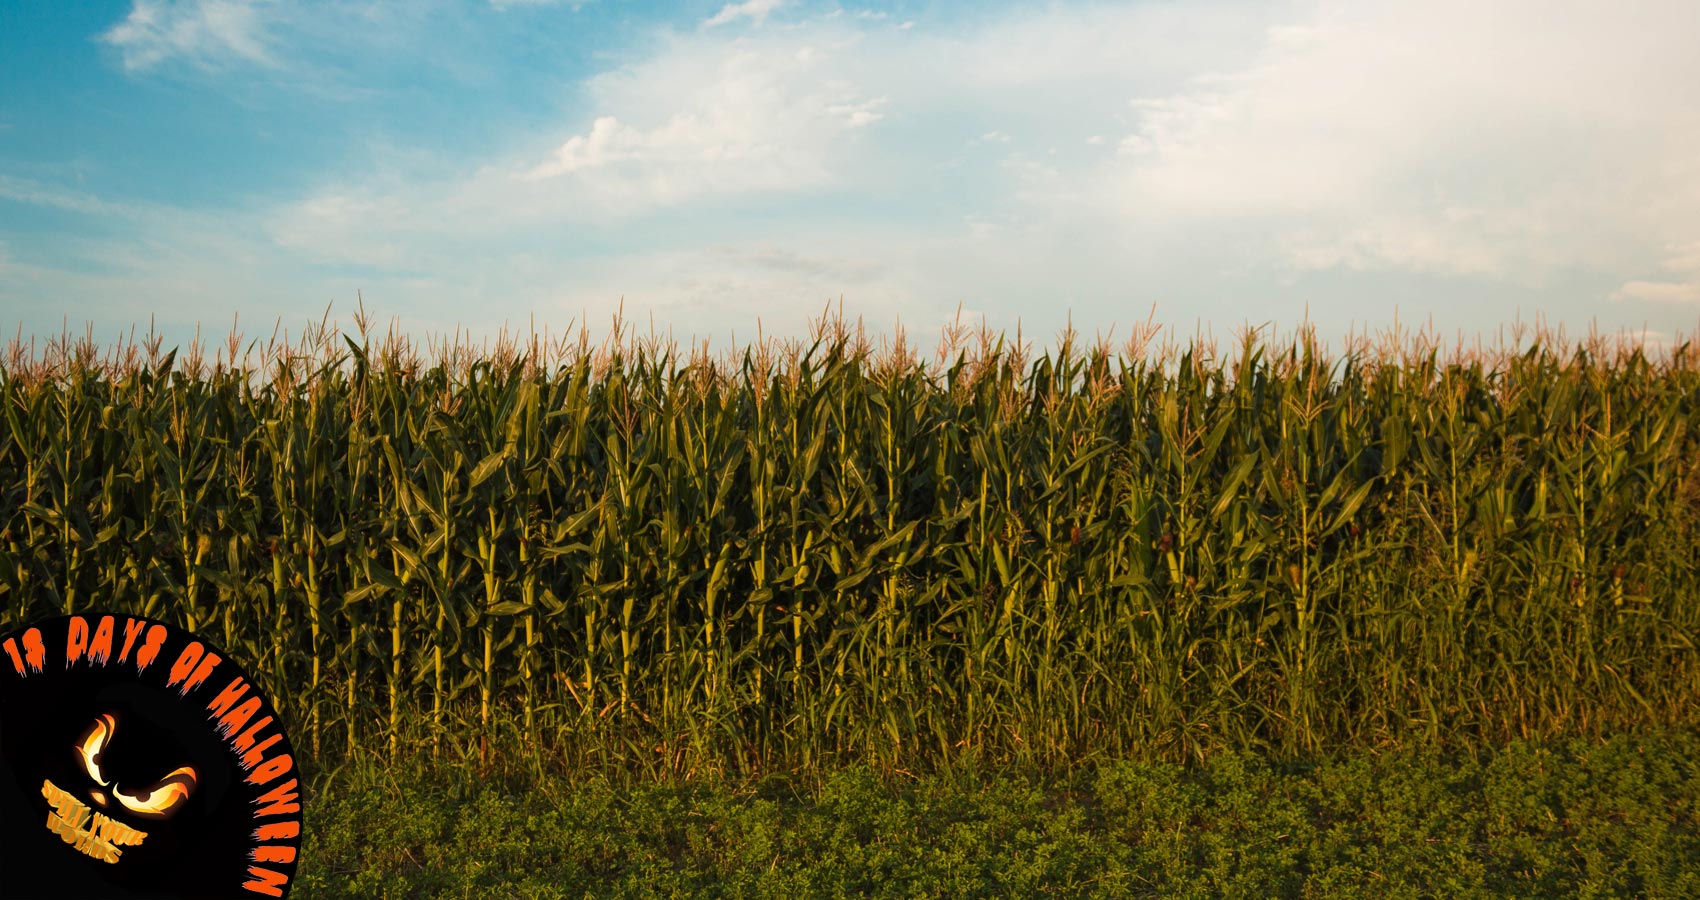 Spirit of The Corn, short story by Richard Prime at Spillwords.com